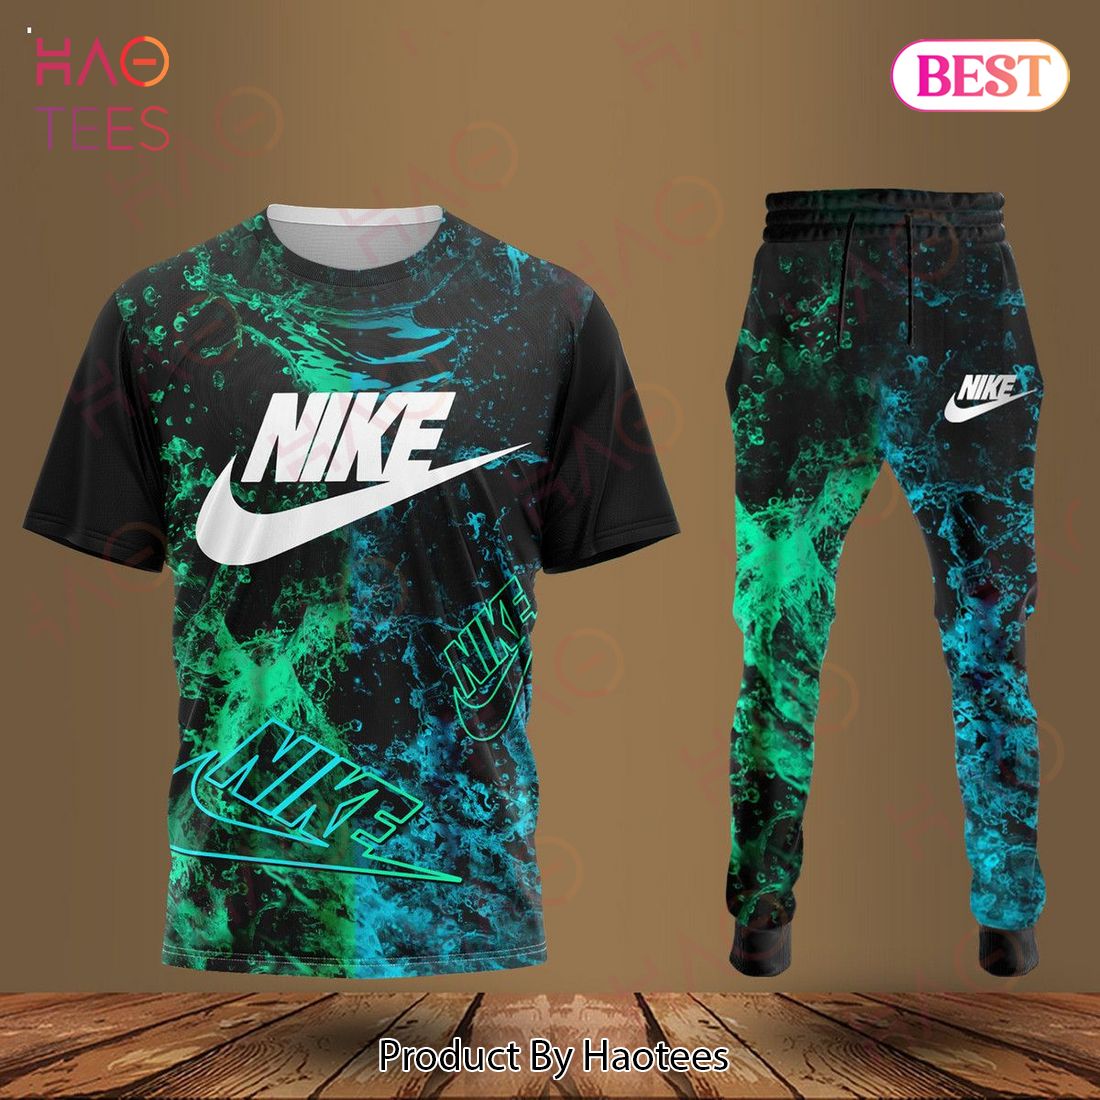 Nike Black Green Blue Luxury Brand T-Shirt And Pants Limited Edition